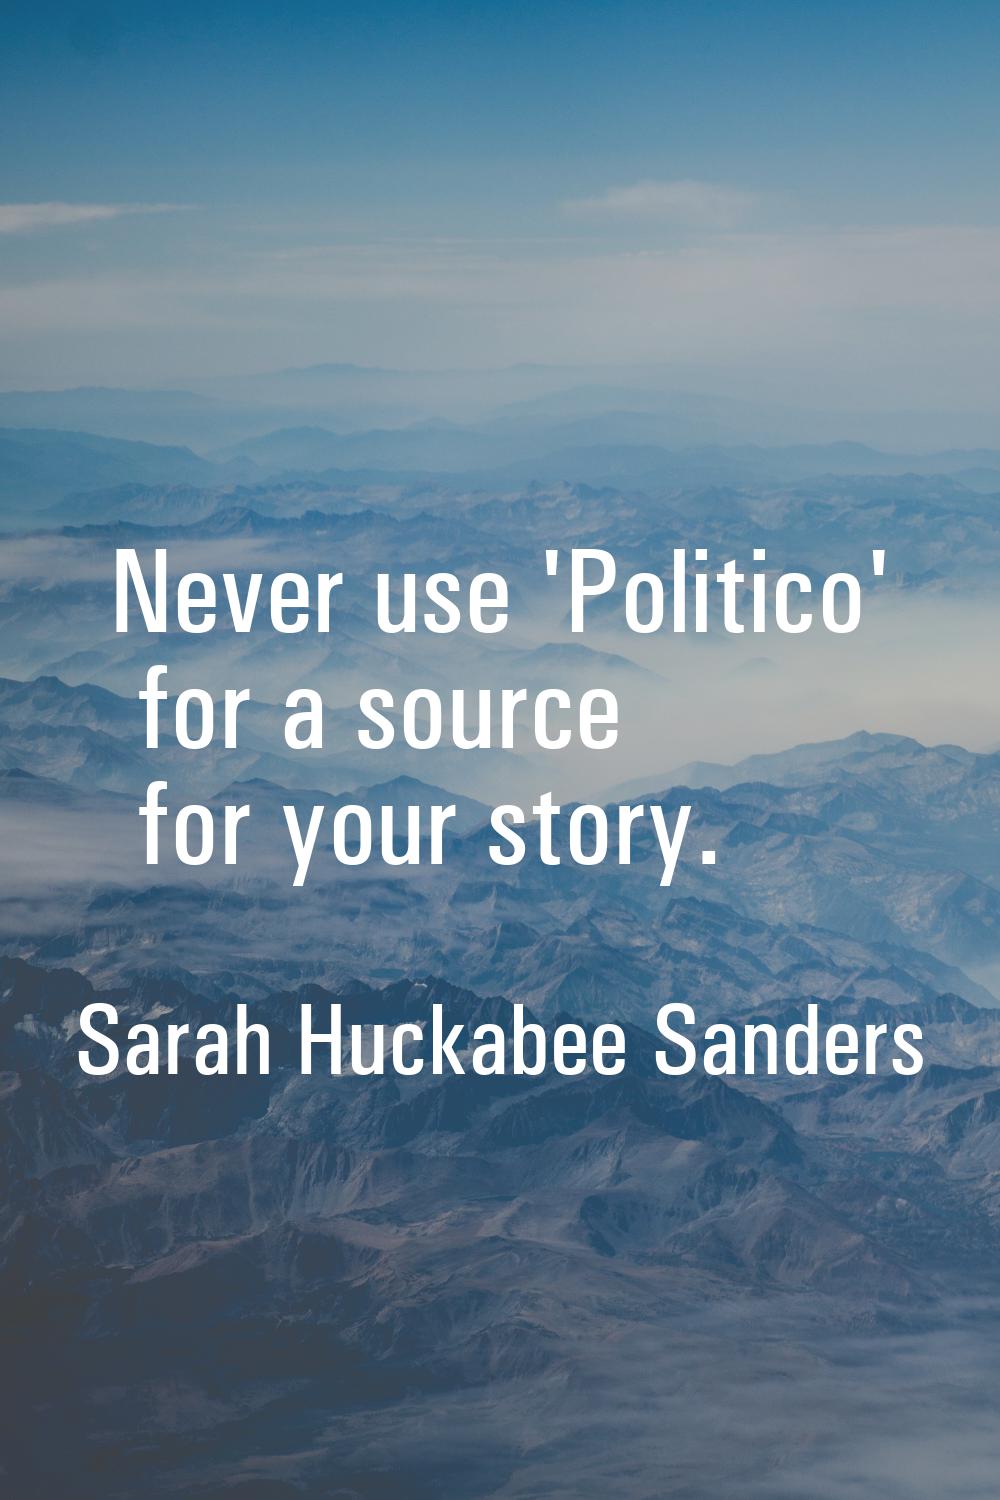 Never use 'Politico' for a source for your story.